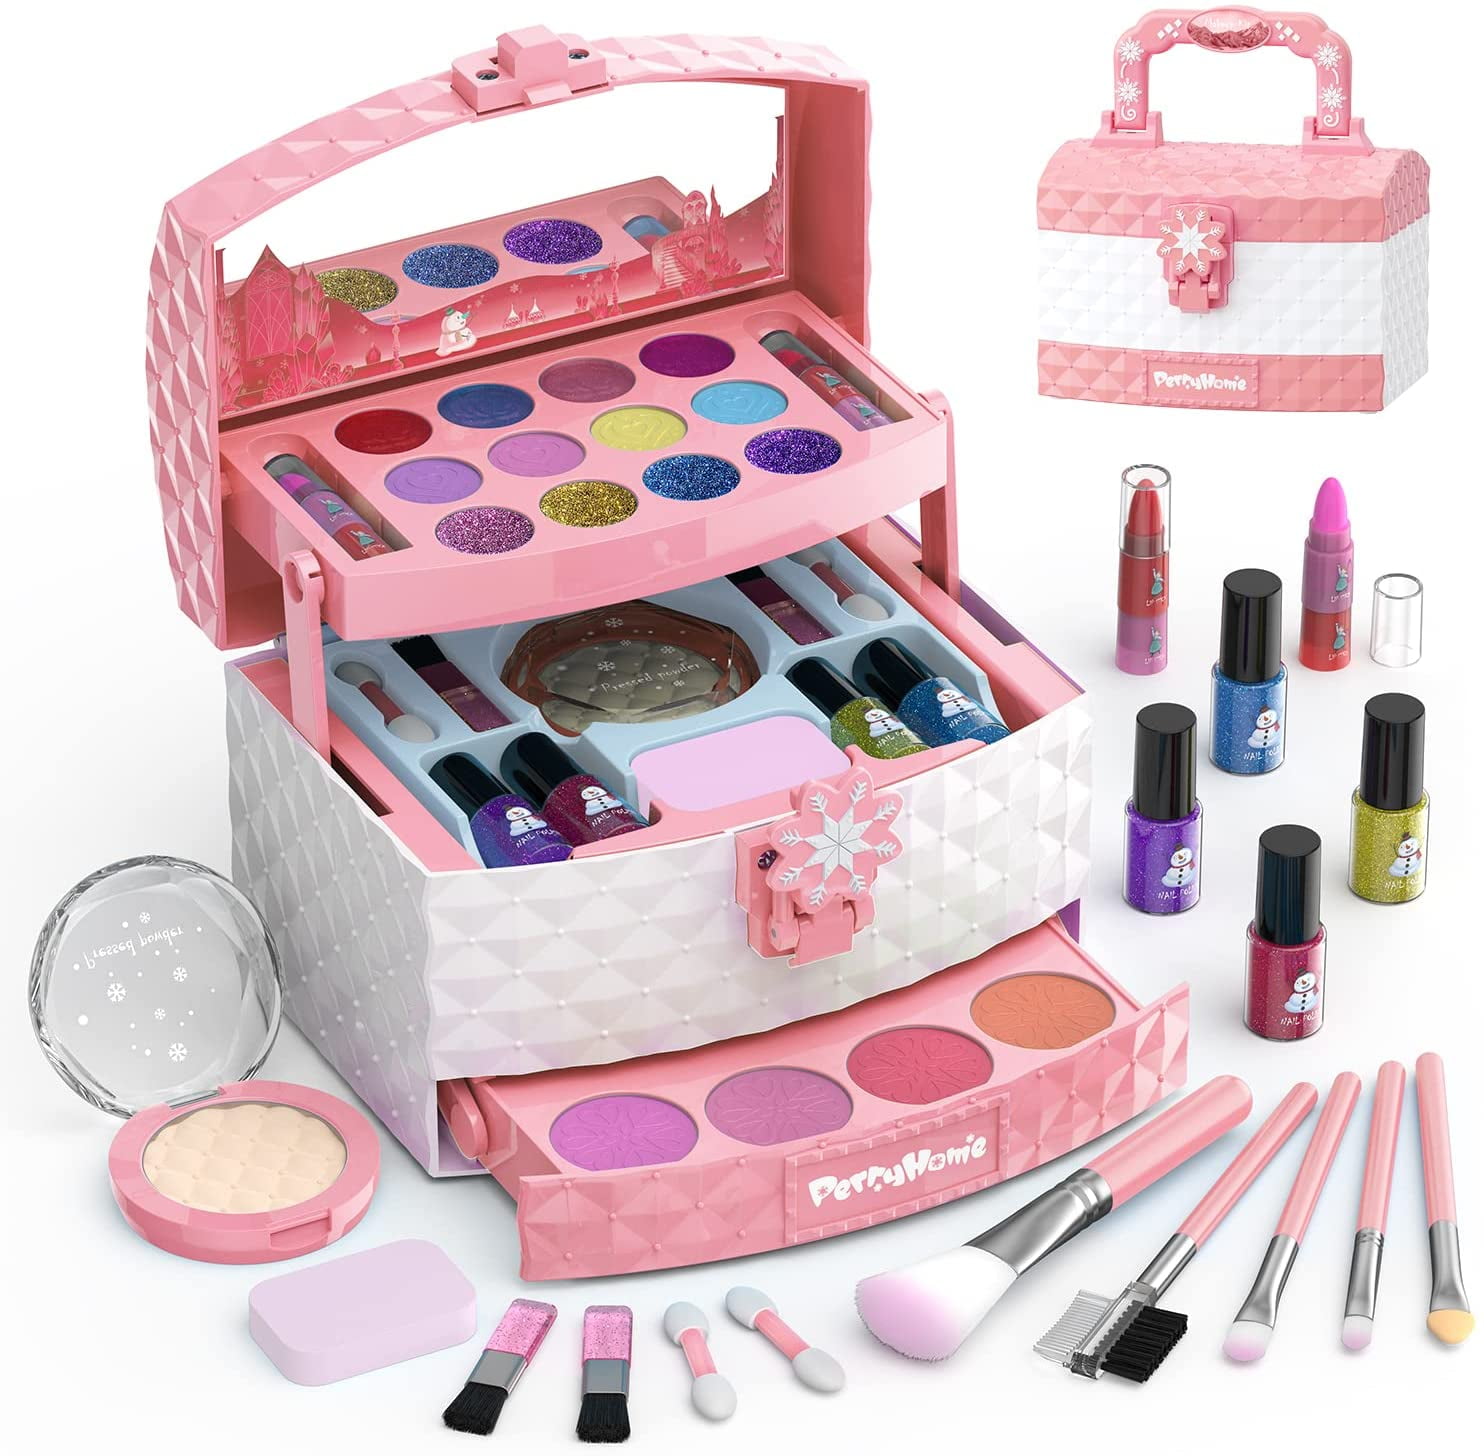 WATTNE Kids Makeup Kit for Girls 35 Washable Real Cosmetic, Safe & Non-Toxic Little Girl Makeup Set, Frozen Makeup Set for 3-12 Year Old Kids Toddler Girl Toys Christmas & Birthday